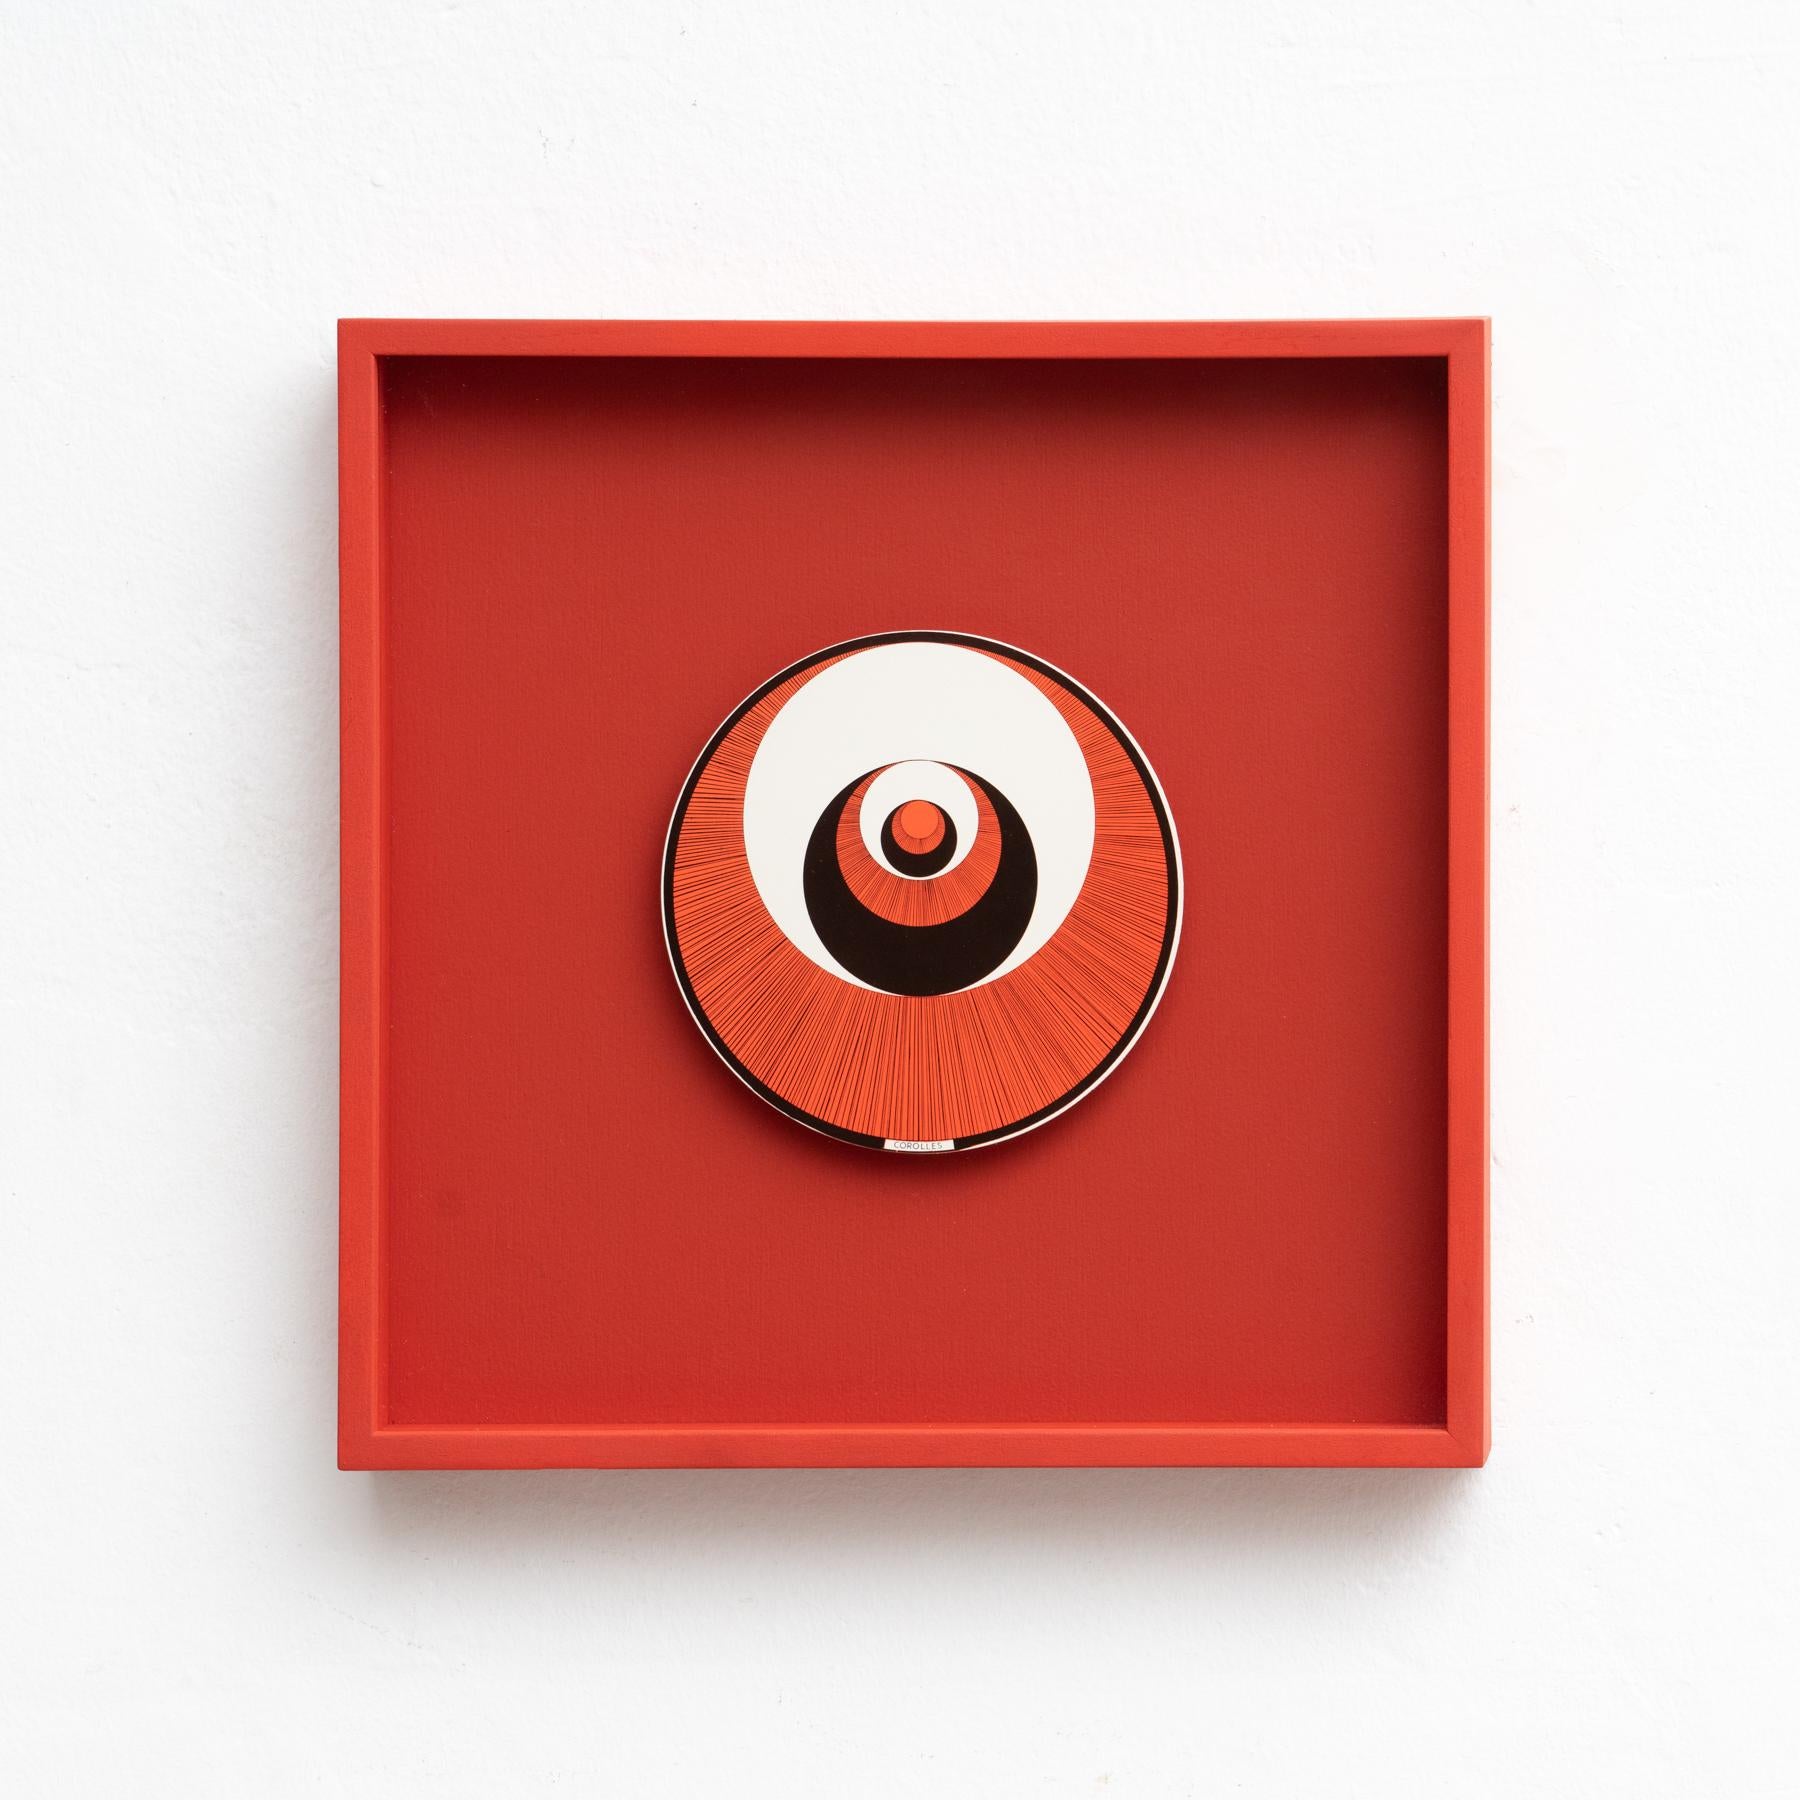 Set of 6 Marcel Duchamp Rotoreliefs Red Frmaed by Konig Series 133, 1987 In Good Condition For Sale In Barcelona, Barcelona